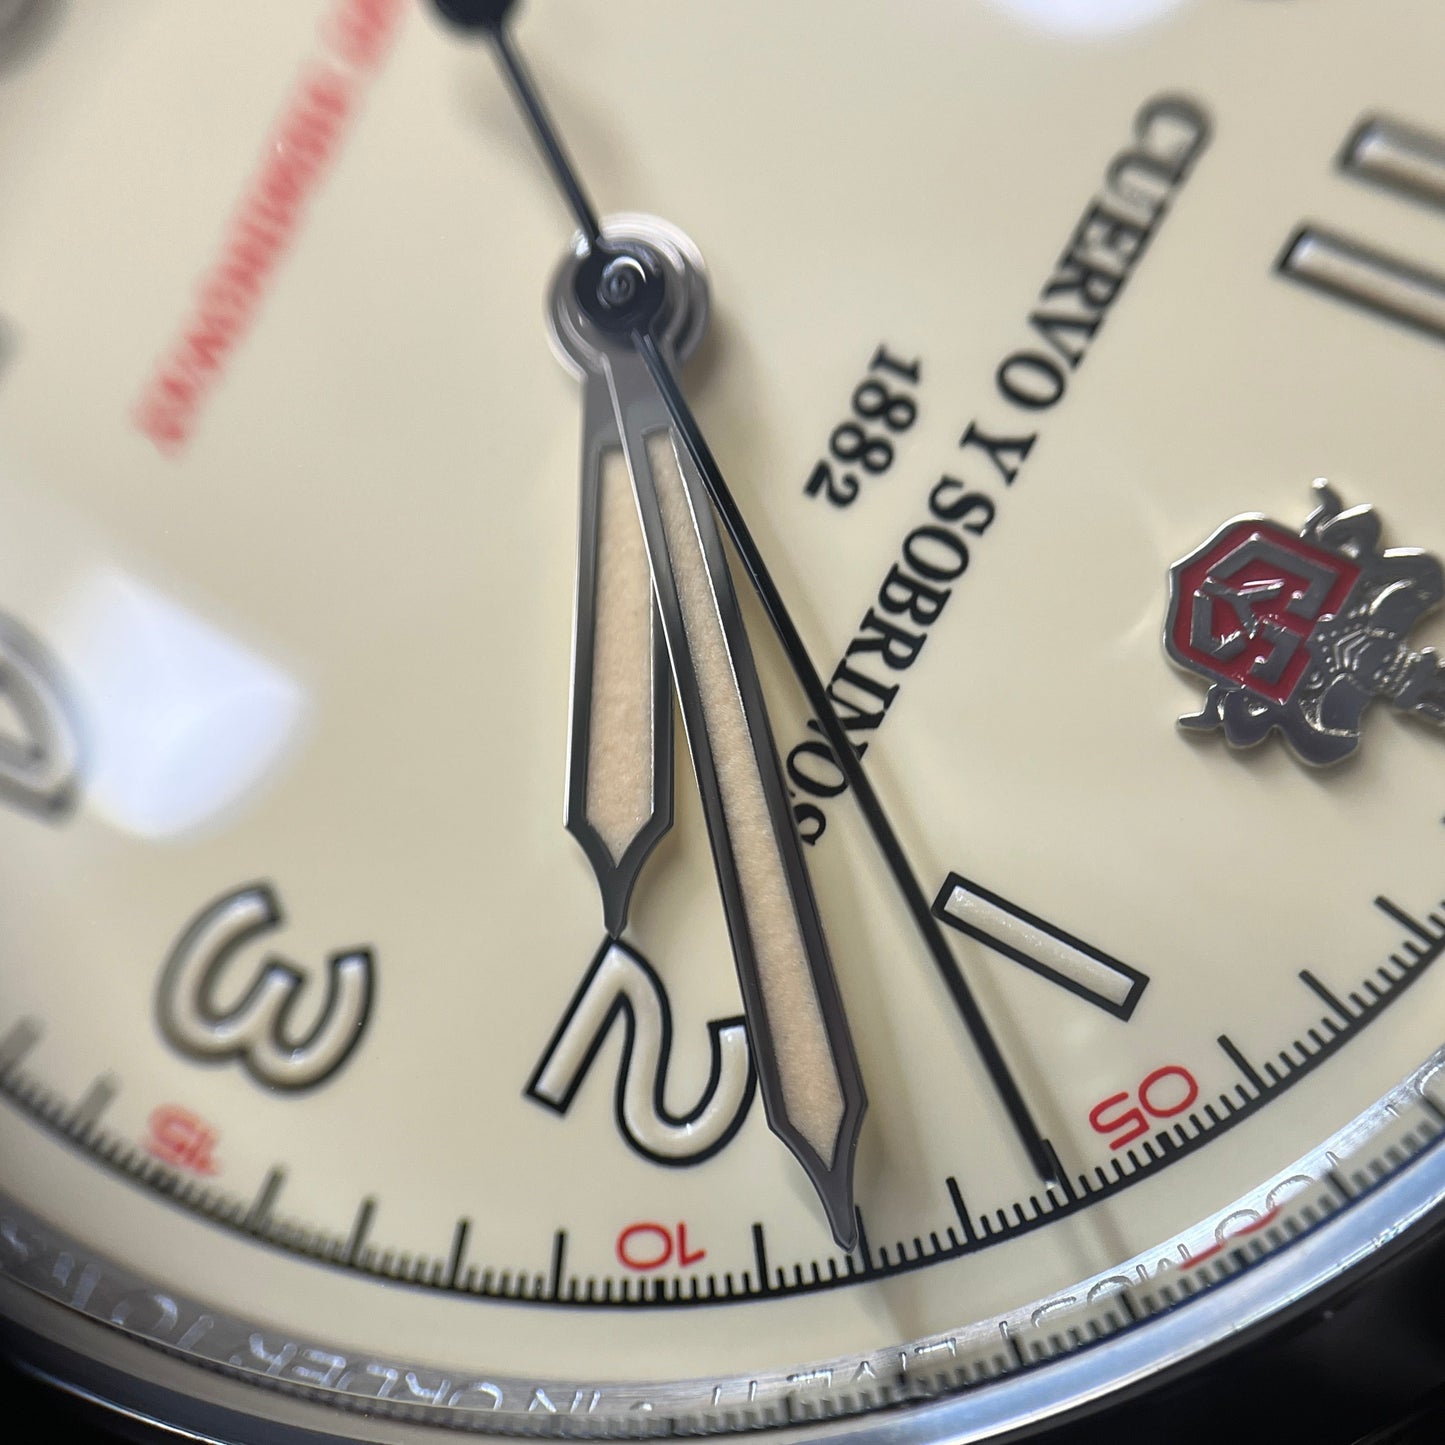 3189　Historiador Limited to 140 pcs worldwide　2CYS01-00003